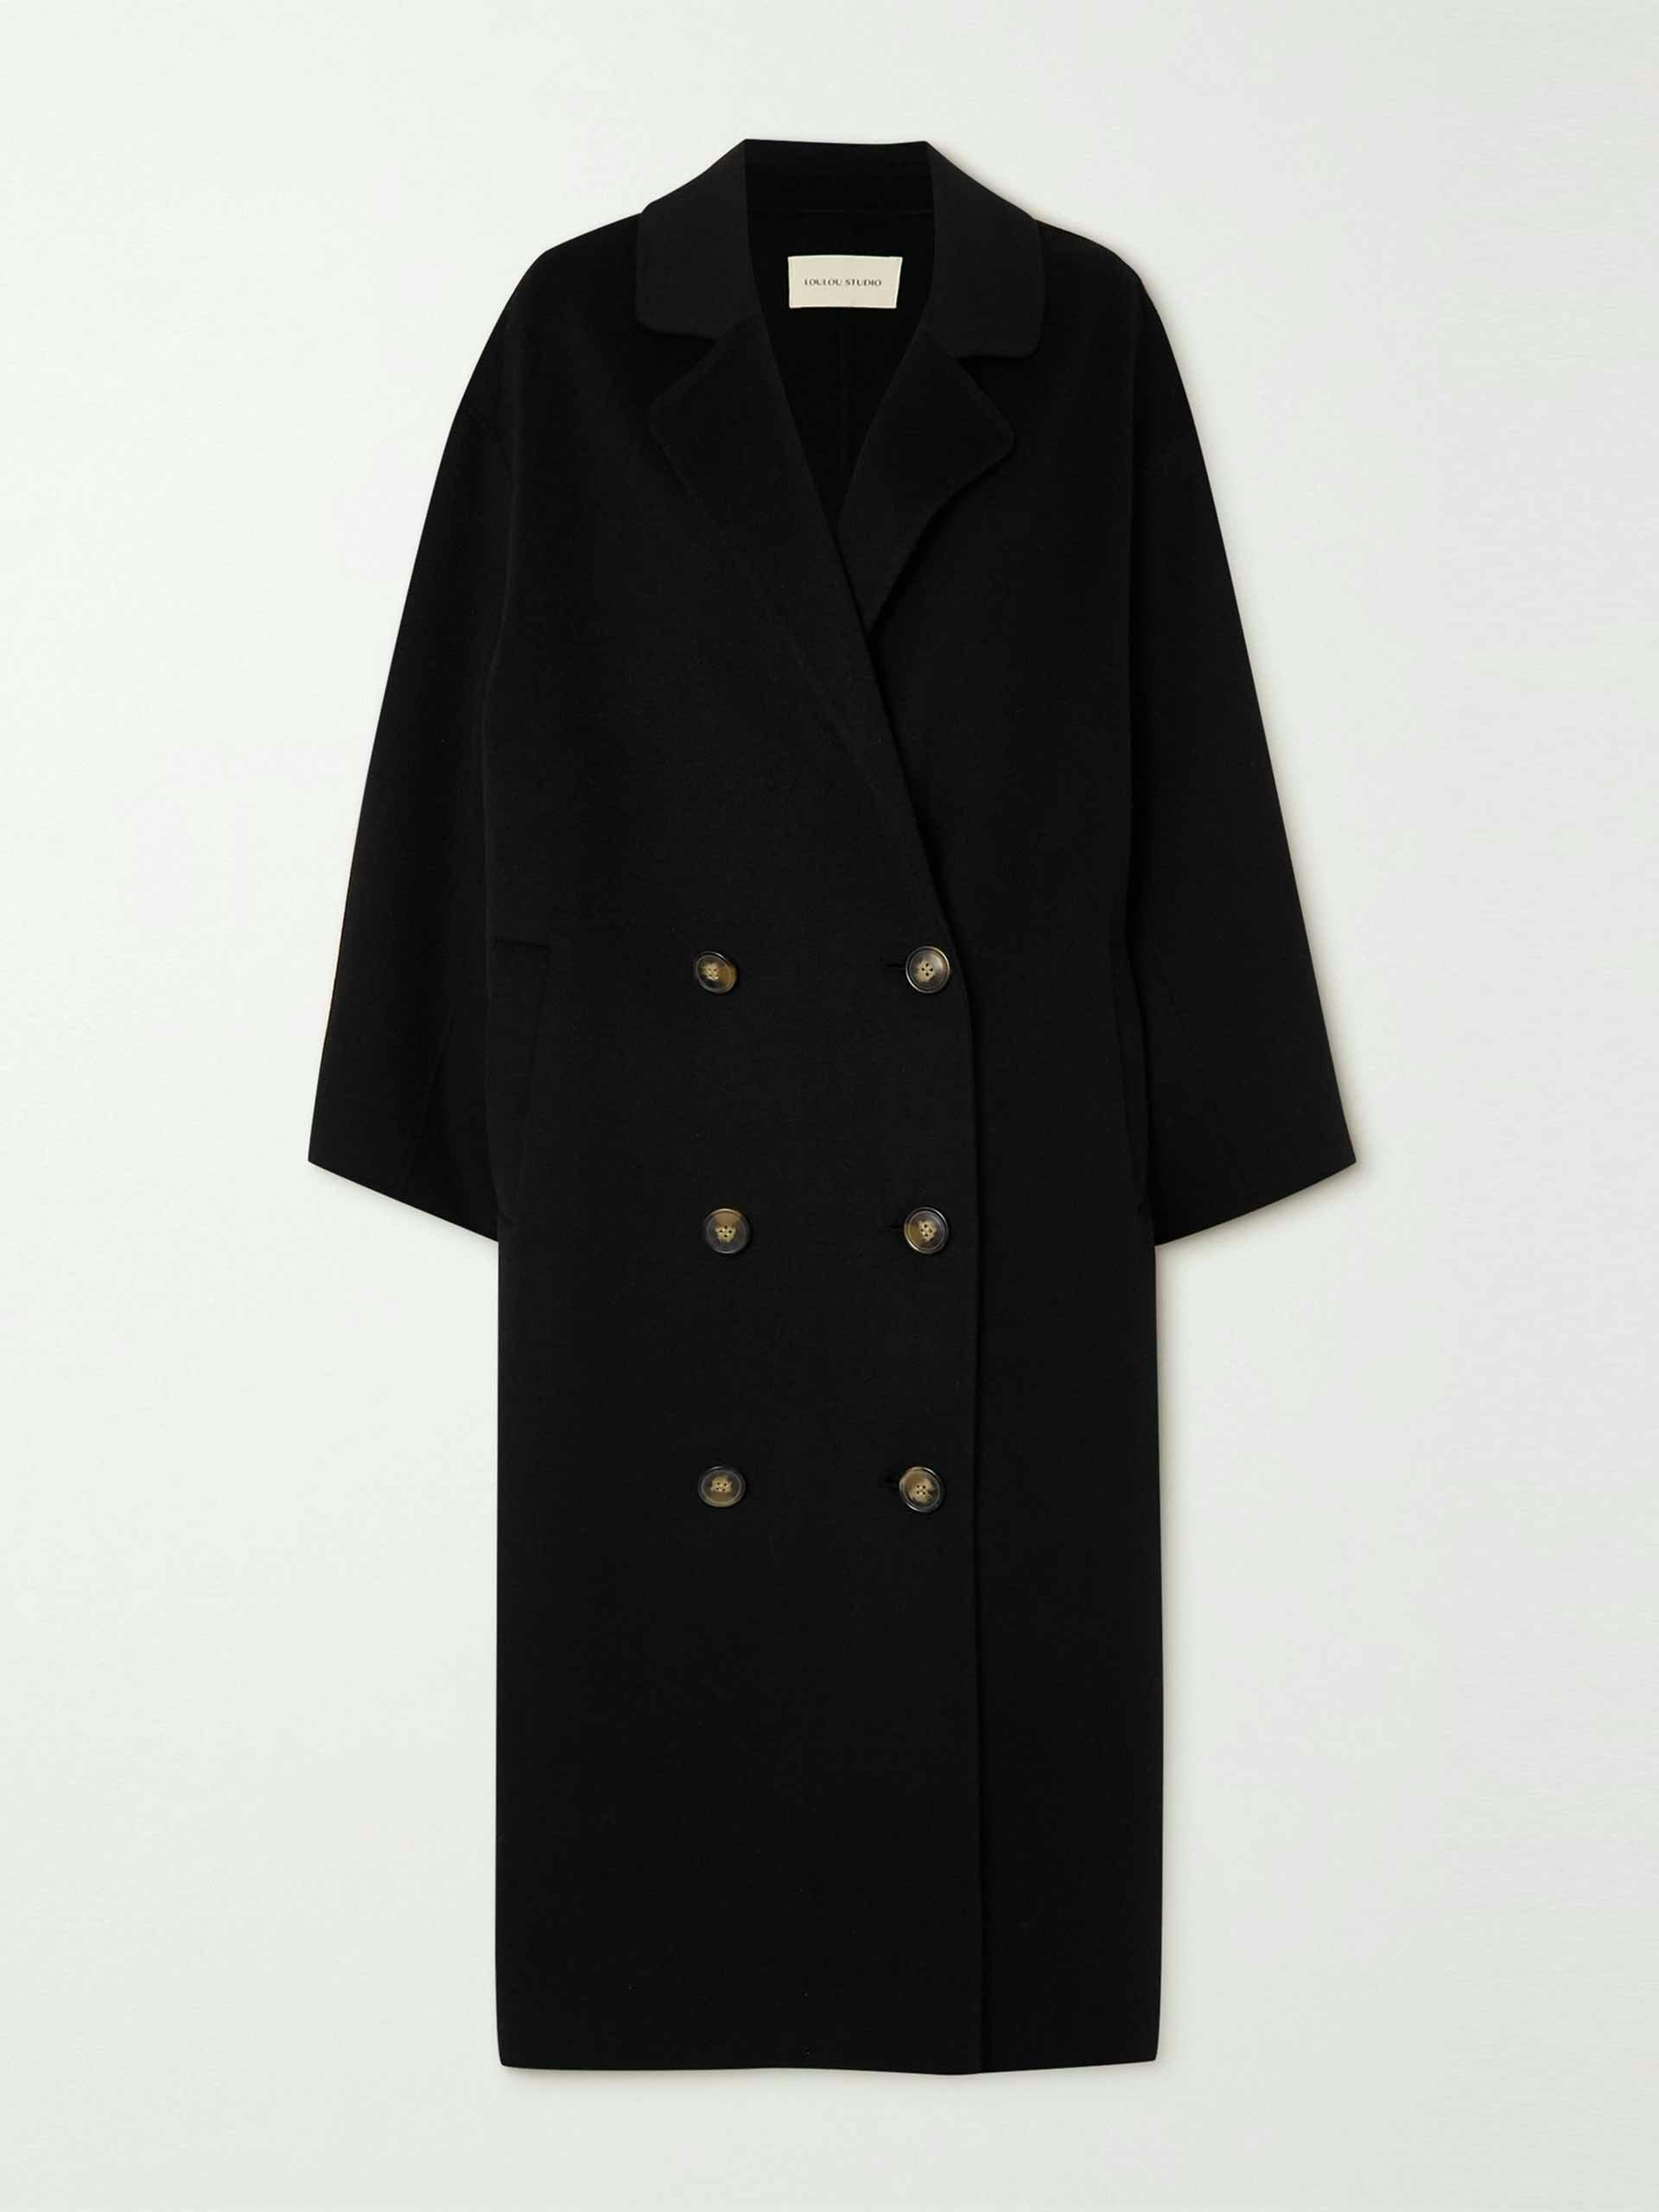 Oversized double-breasted wool and cashmere blend coat